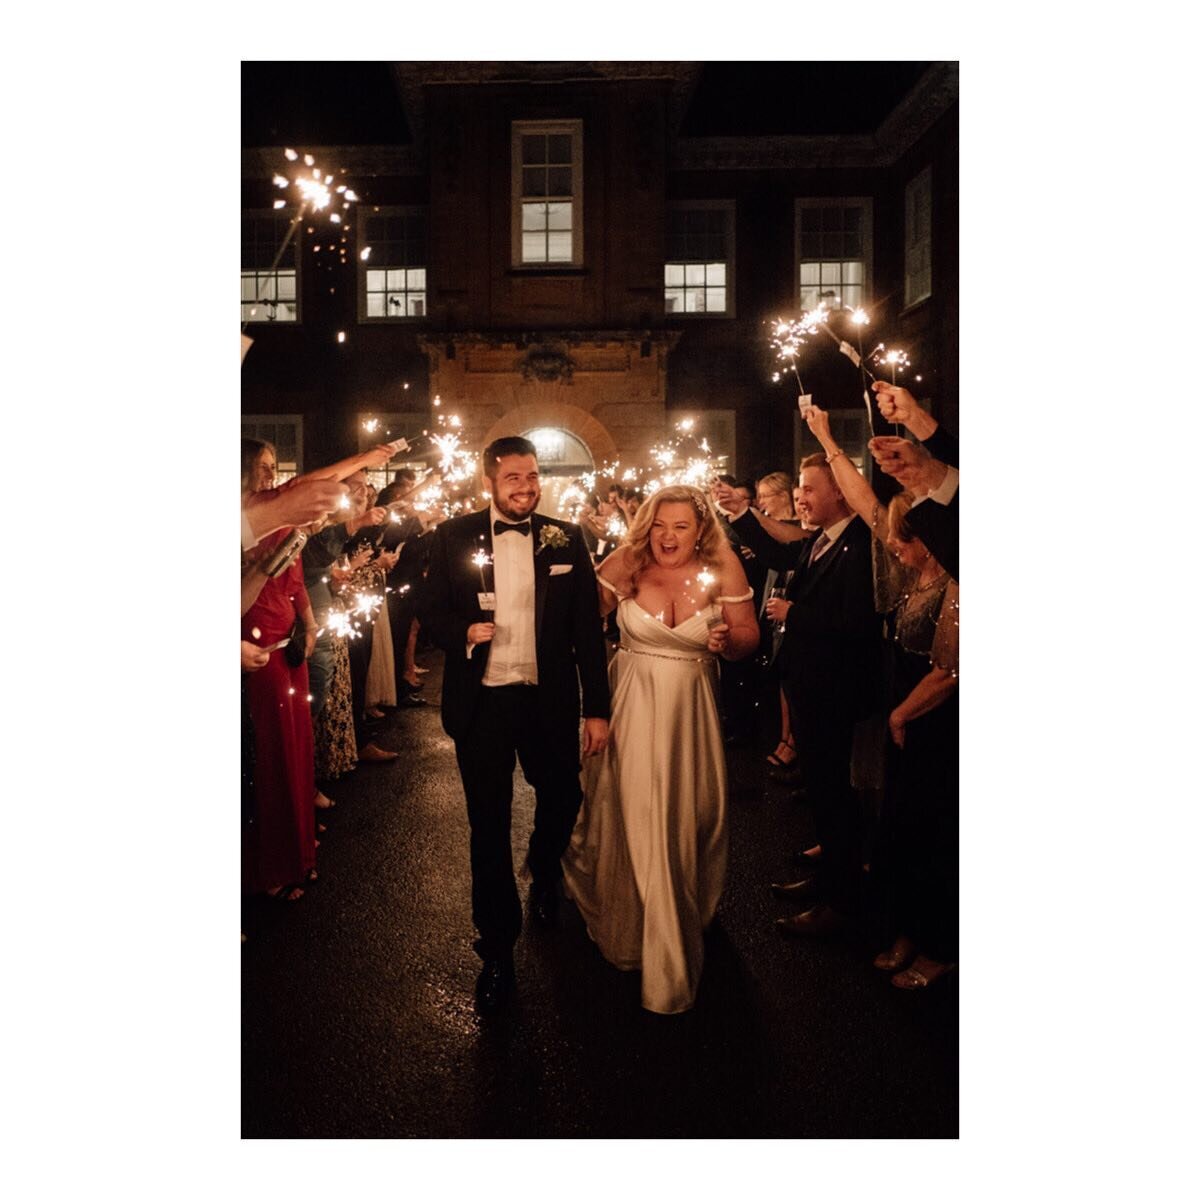 This is what a New Year&rsquo;s Eve wedding looks like, and now I want to shoot one every year! 
Thank you Amelia &amp; Luke, so much fun.

Venue: @barnetthillhotel 
Flowers: @littleflower_florest 
Makeup: @stephaniedorelliih
Hair: @occasionhairbymeg